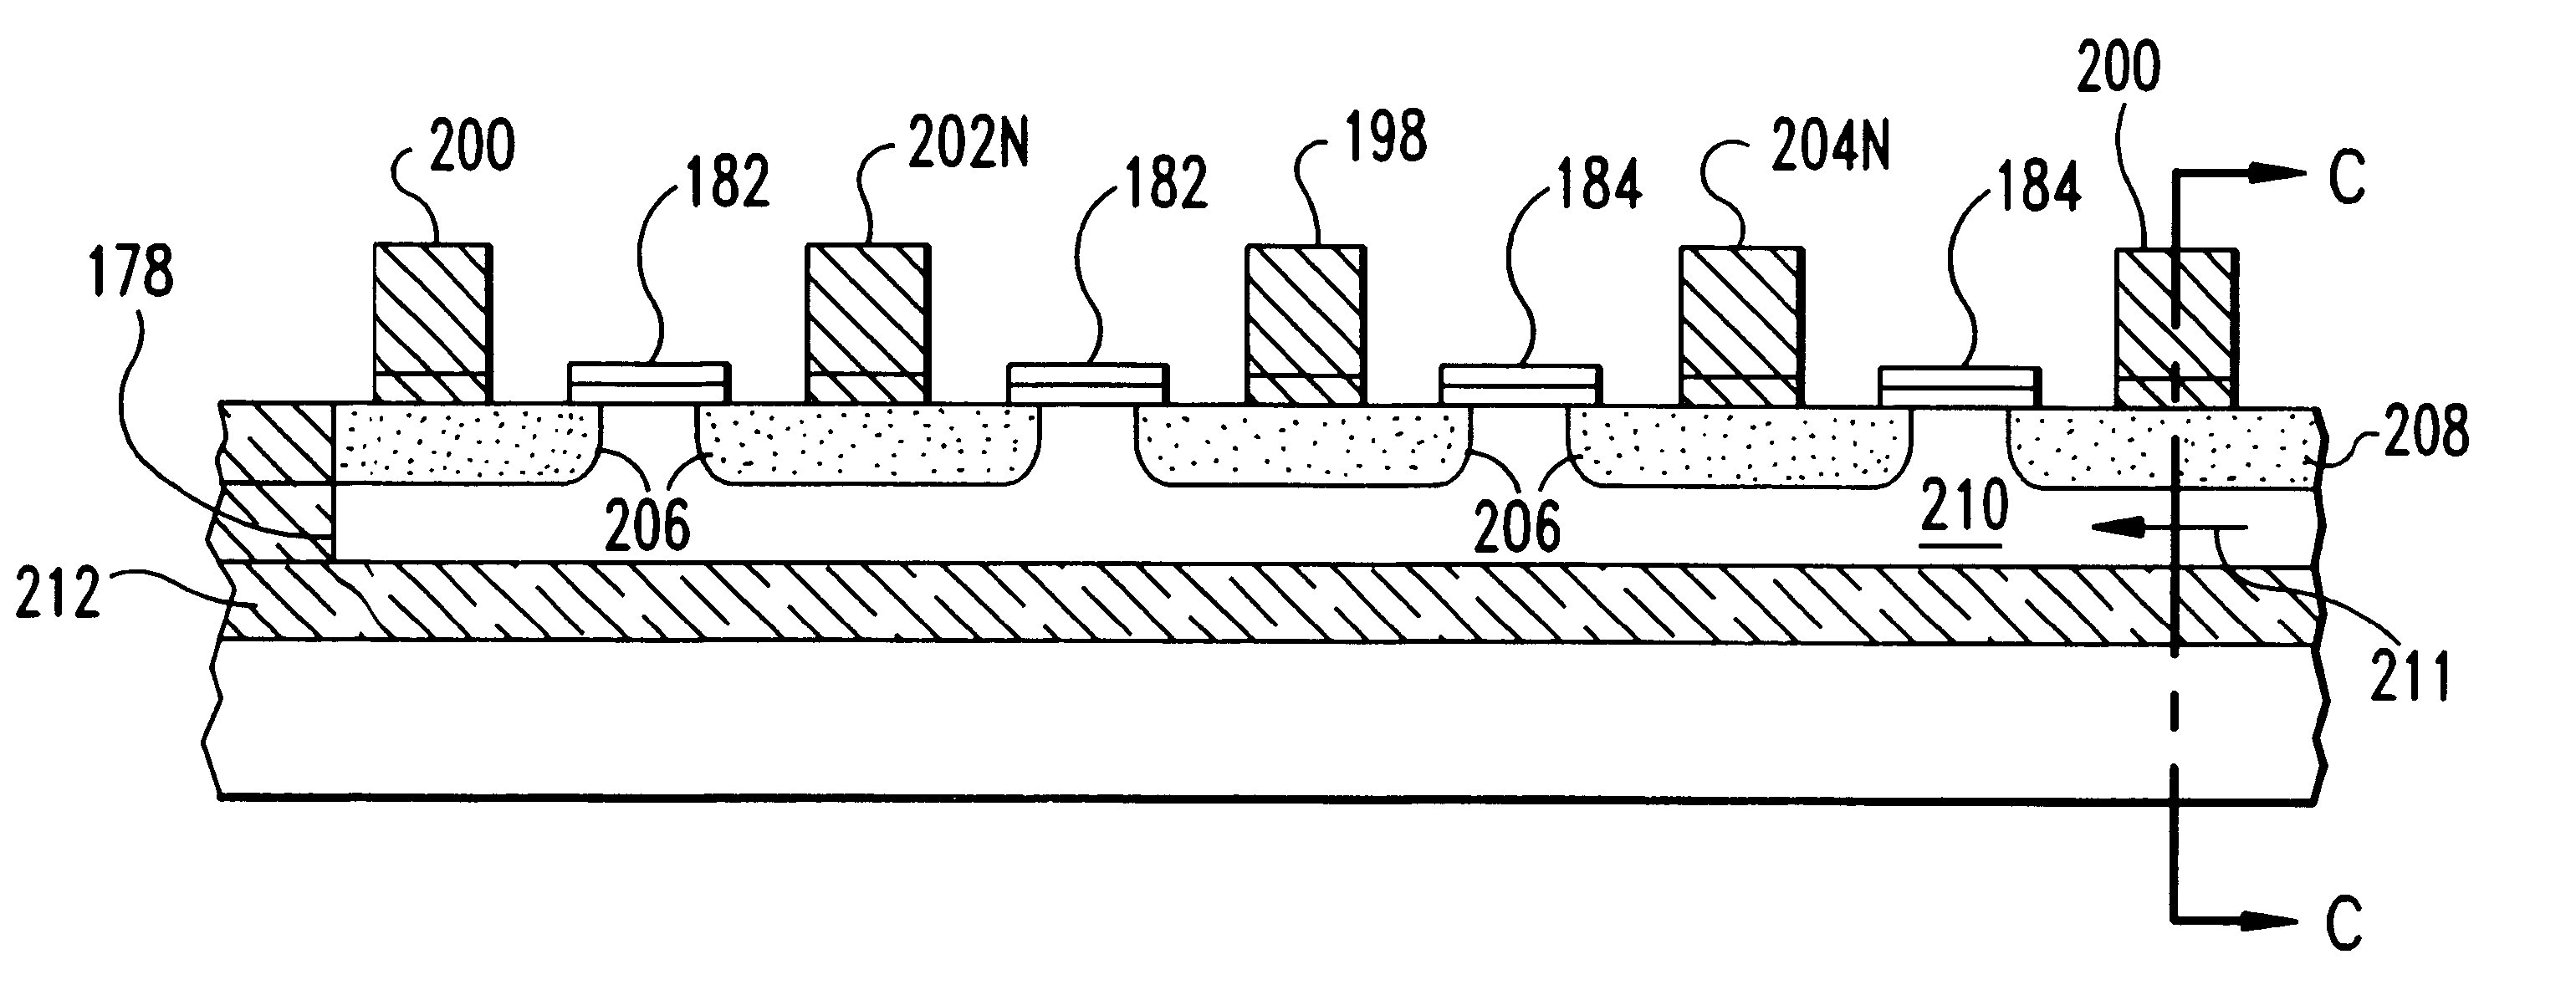 Silicon on insulator field effect transistors having shared body contact